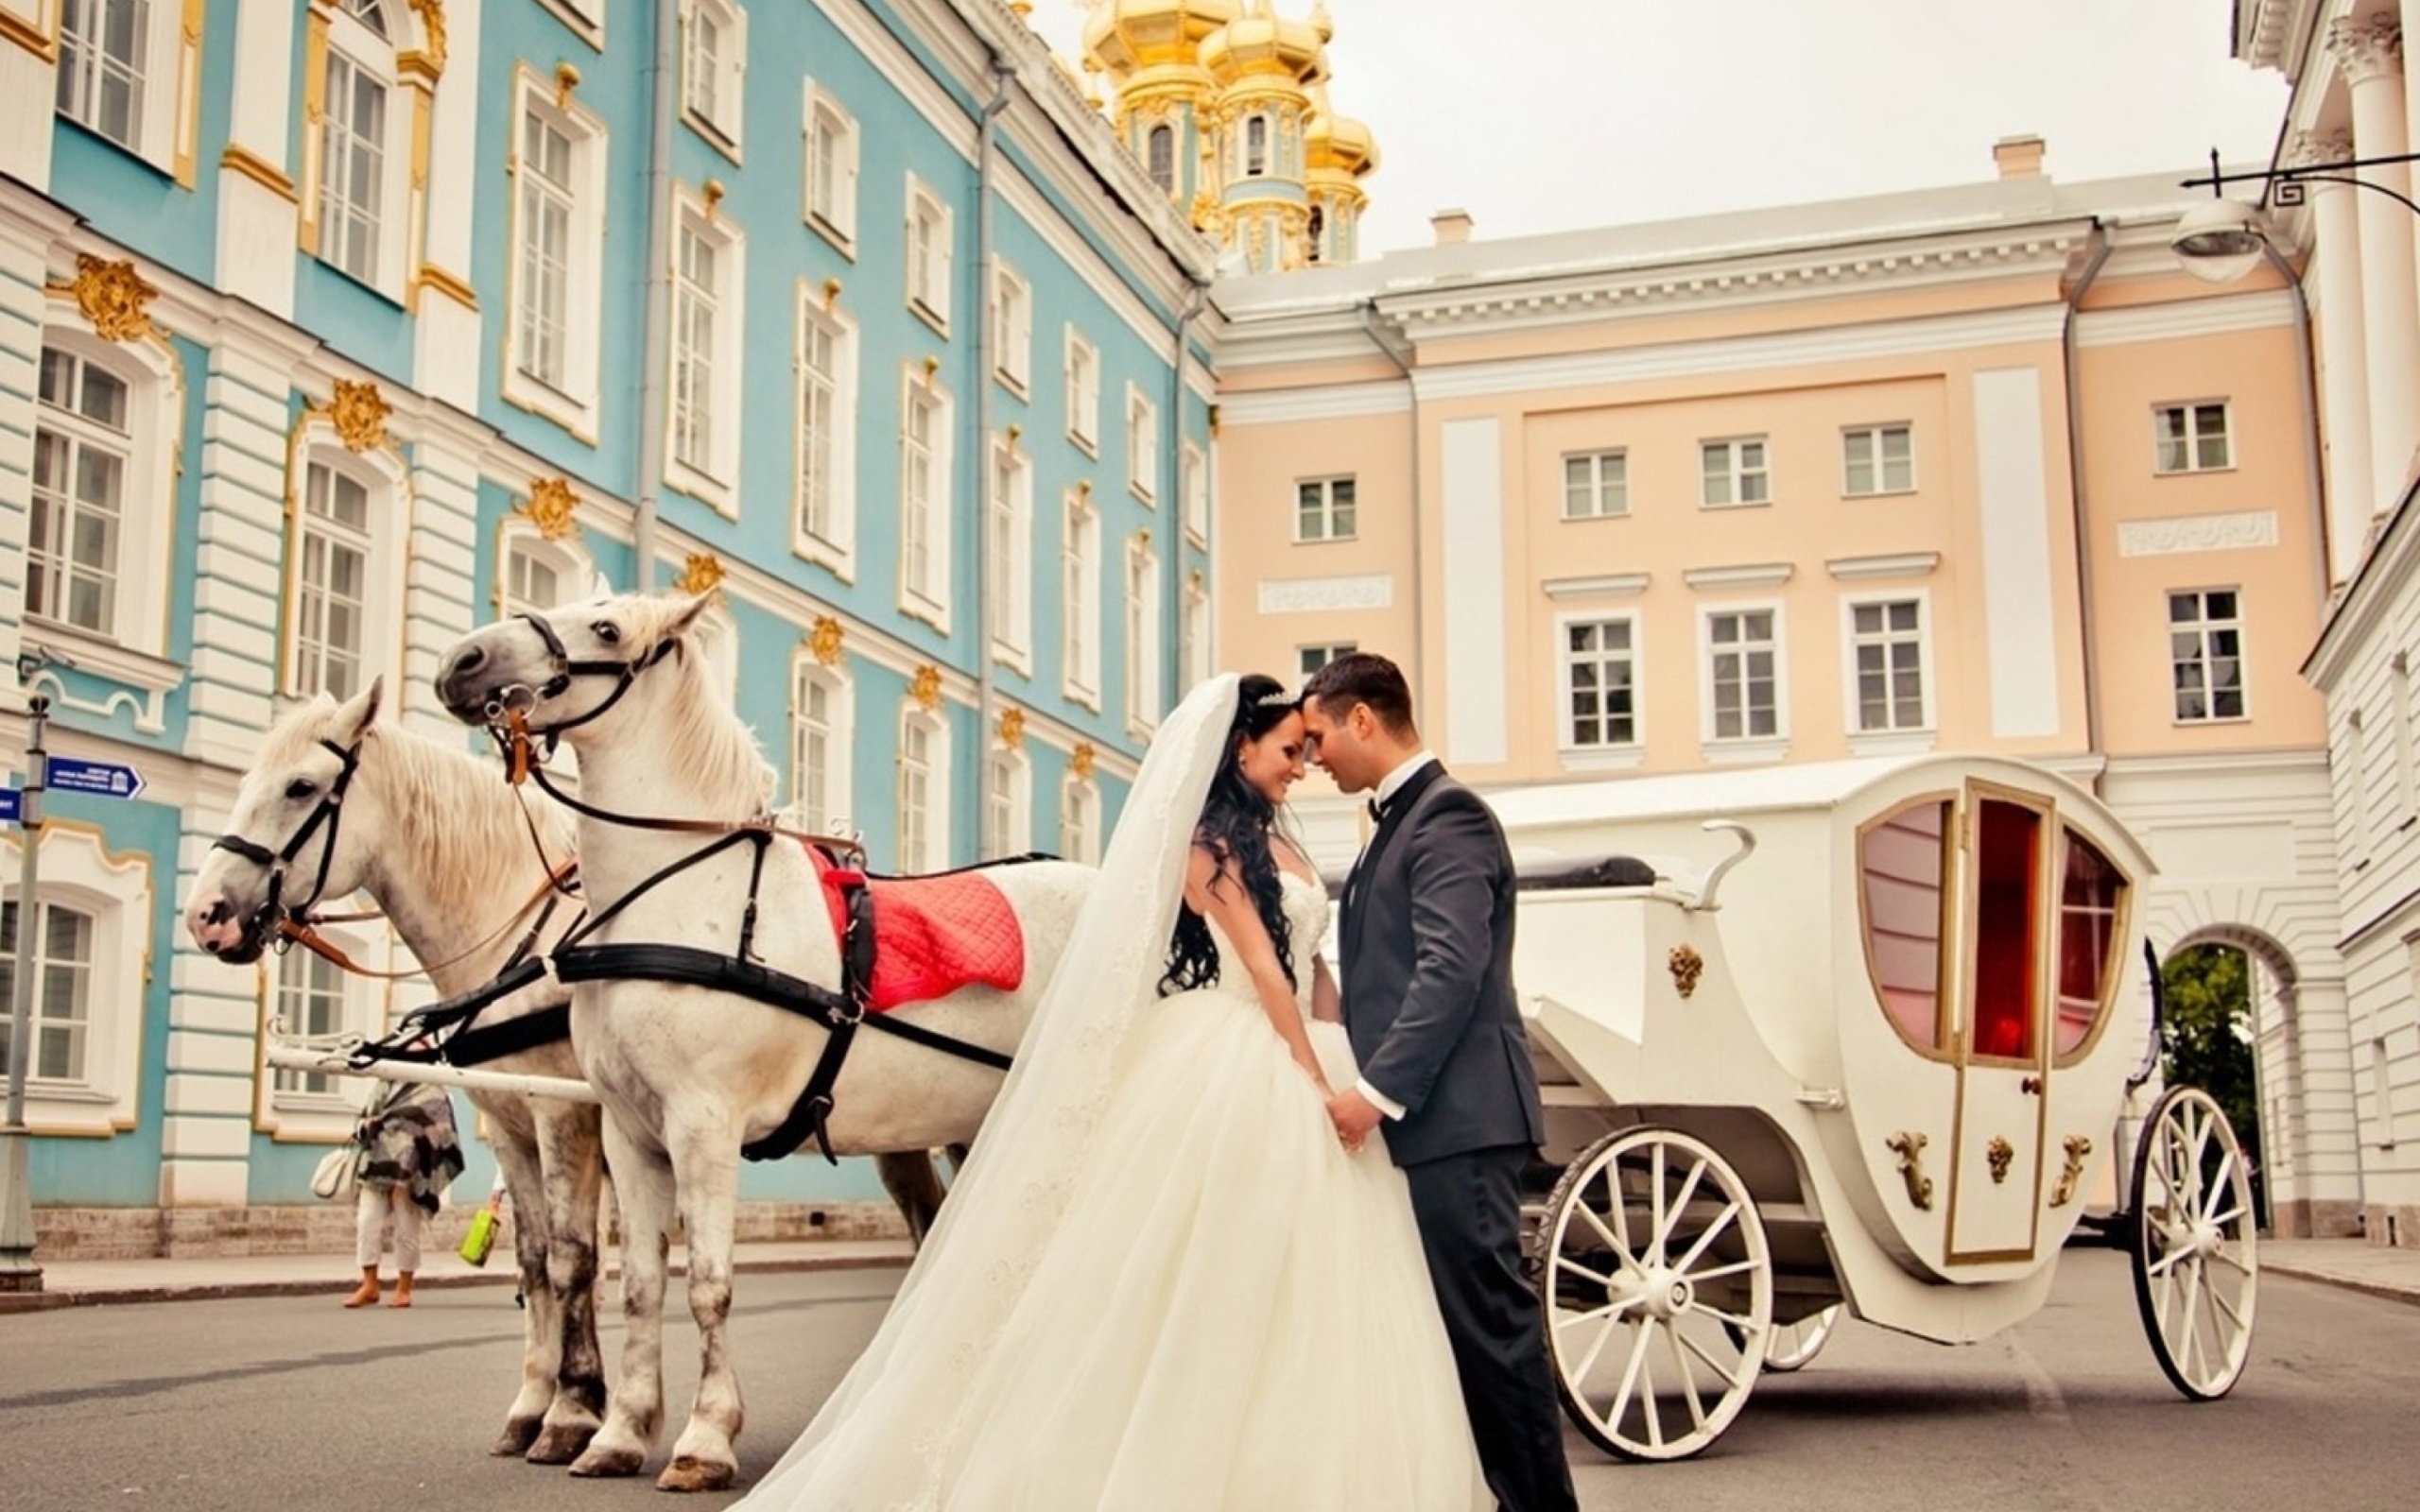 Wedding in carriage wallpaper 2560x1600